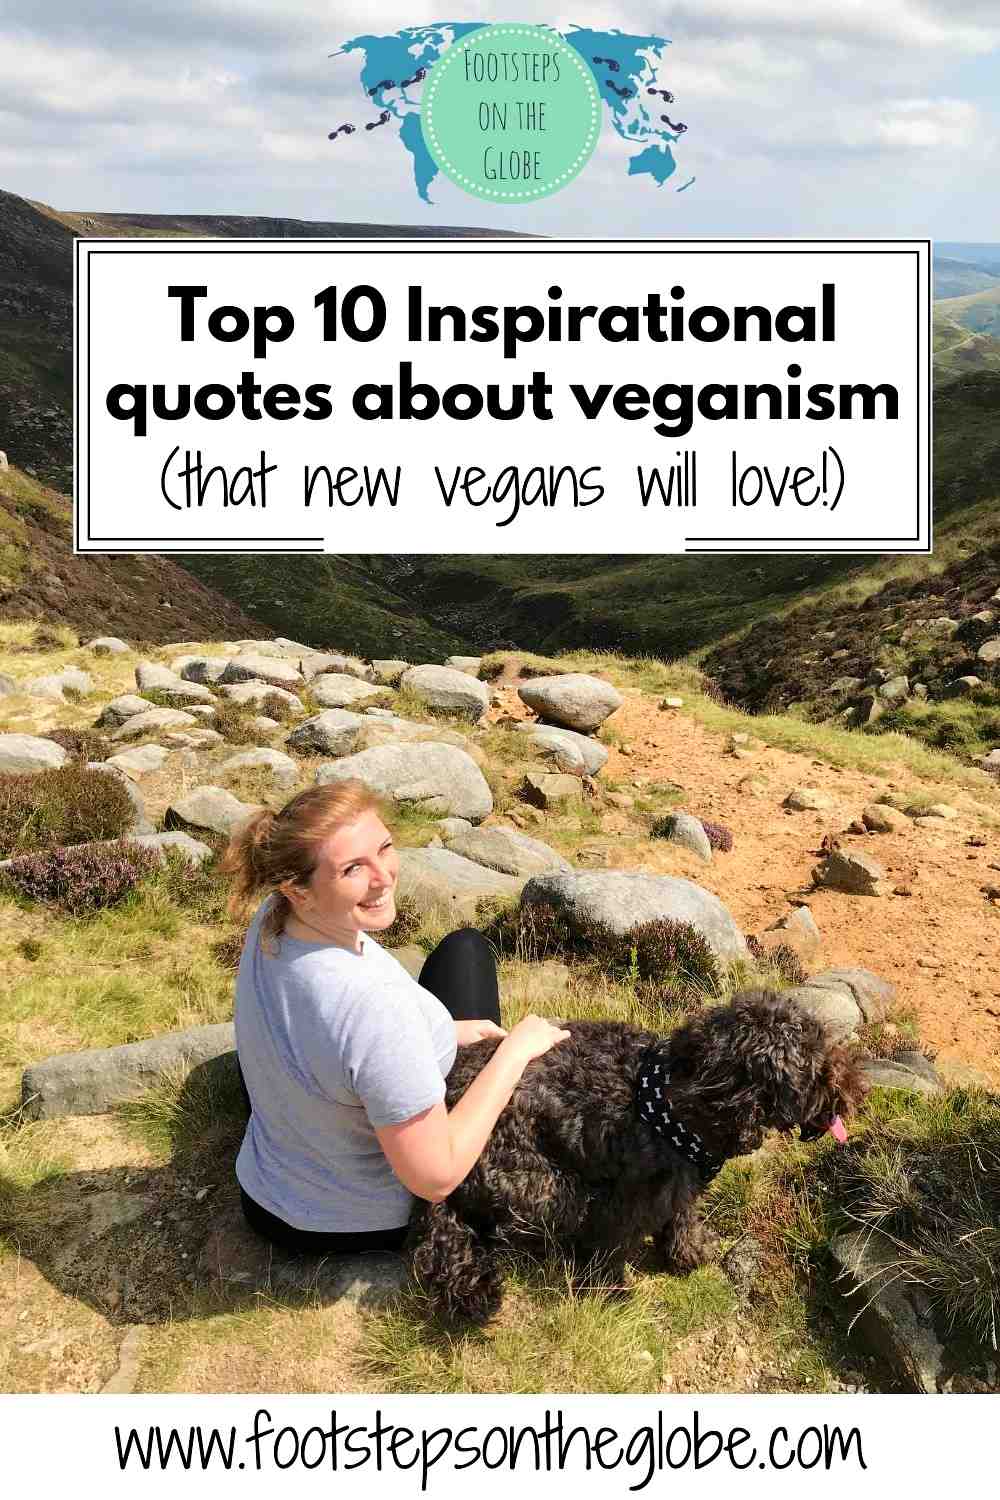 Girl and her grey dog sitting on a grassy hill overlooking hills in the UK